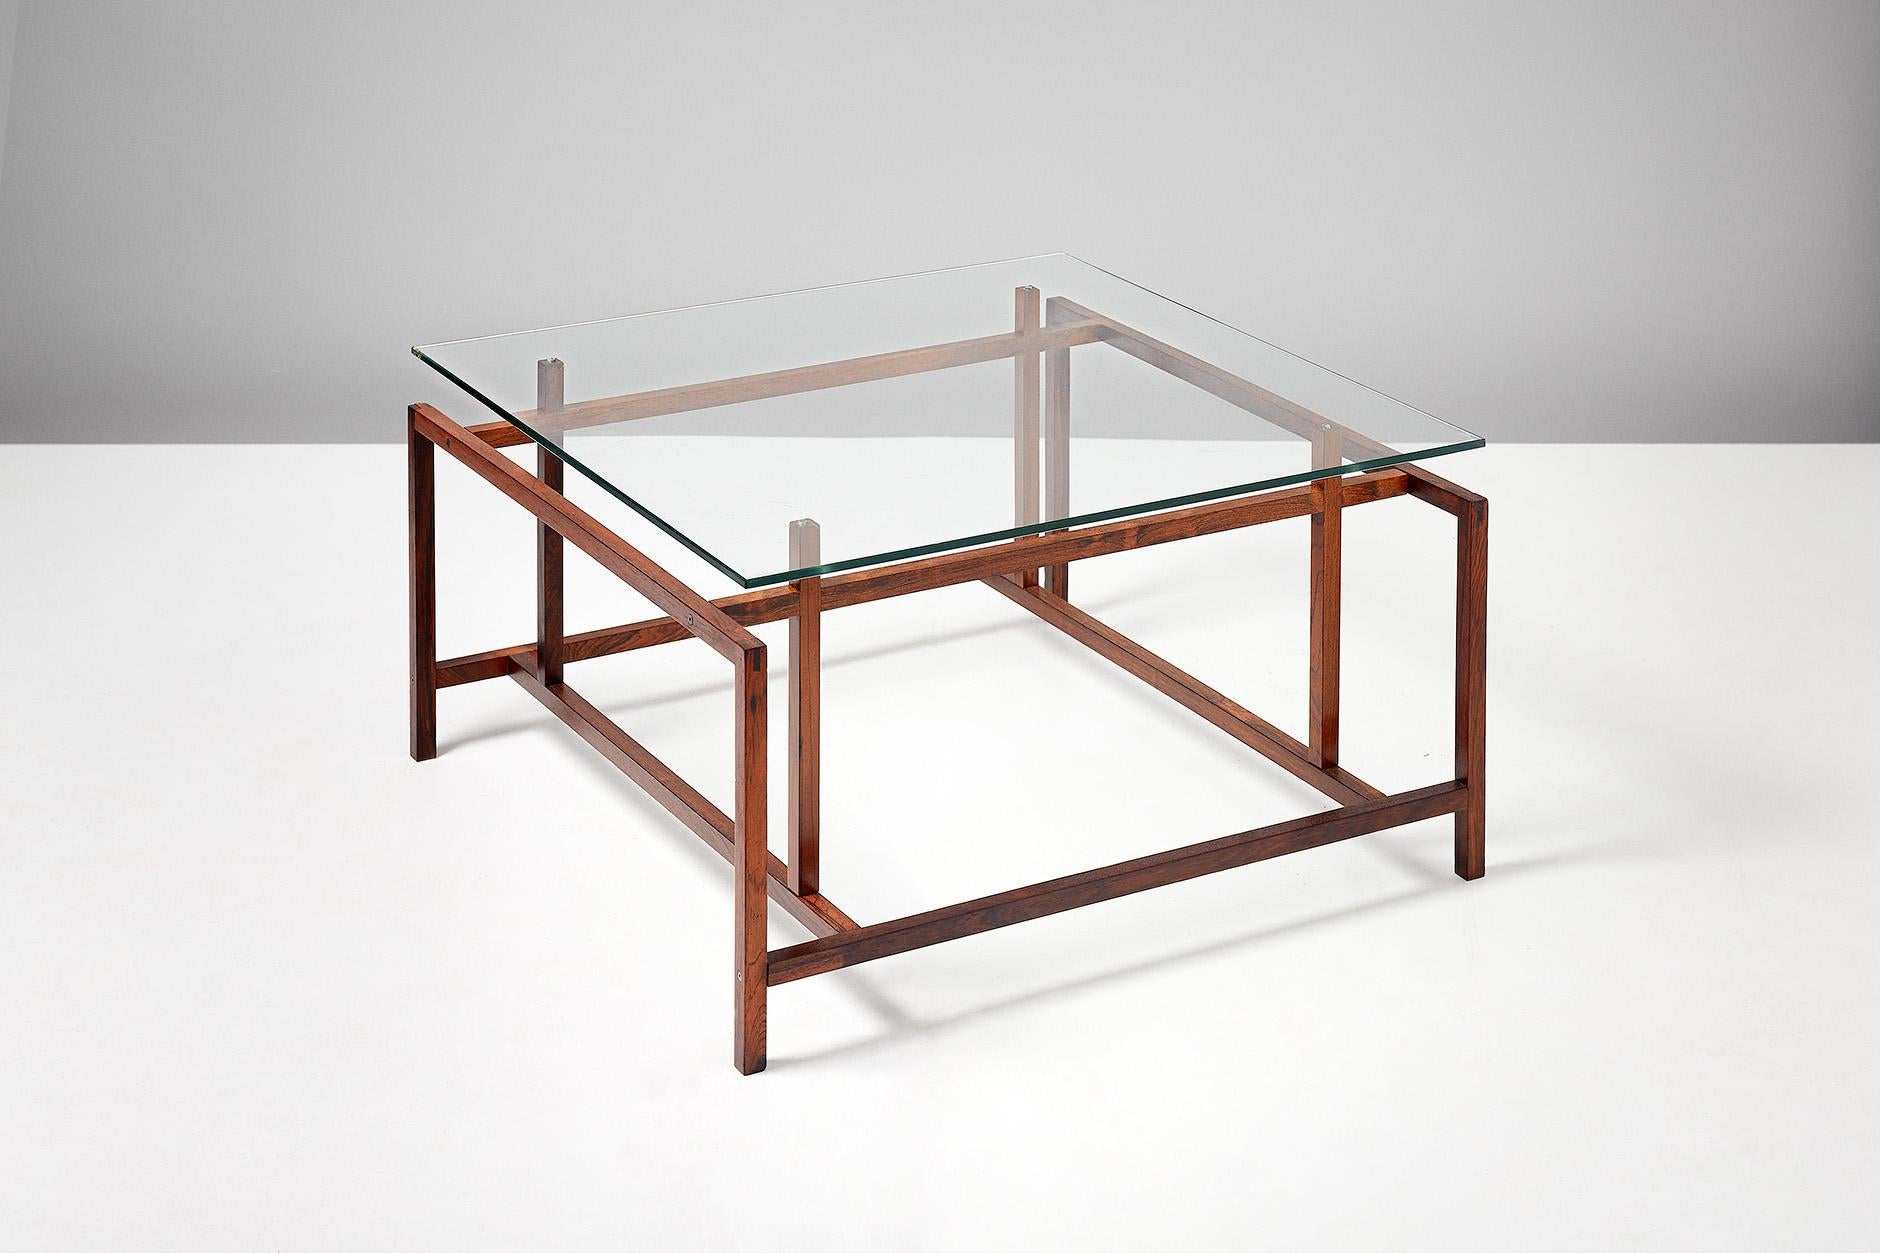 Henning Norgaard

Rosewood frame coffee table with glass top, produced by Komfort, Denmark. 

Measures: H. 39cm, D. 70cm, L. 70 cm.